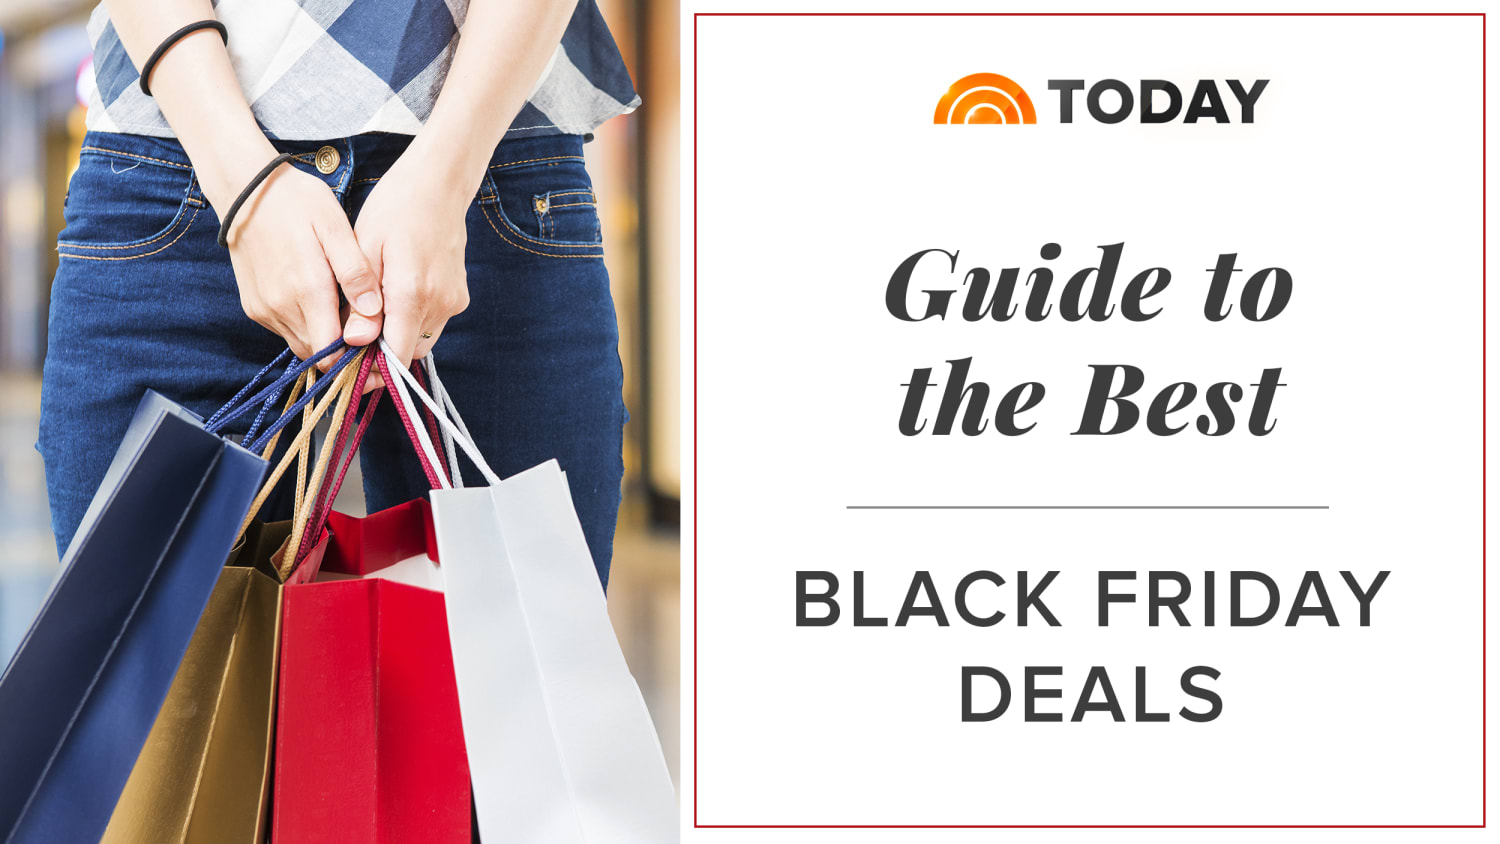 Best Black Friday Deals on Amazon, Target and more 2017 - TODAY.com - How To Track Best Black Friday Deals